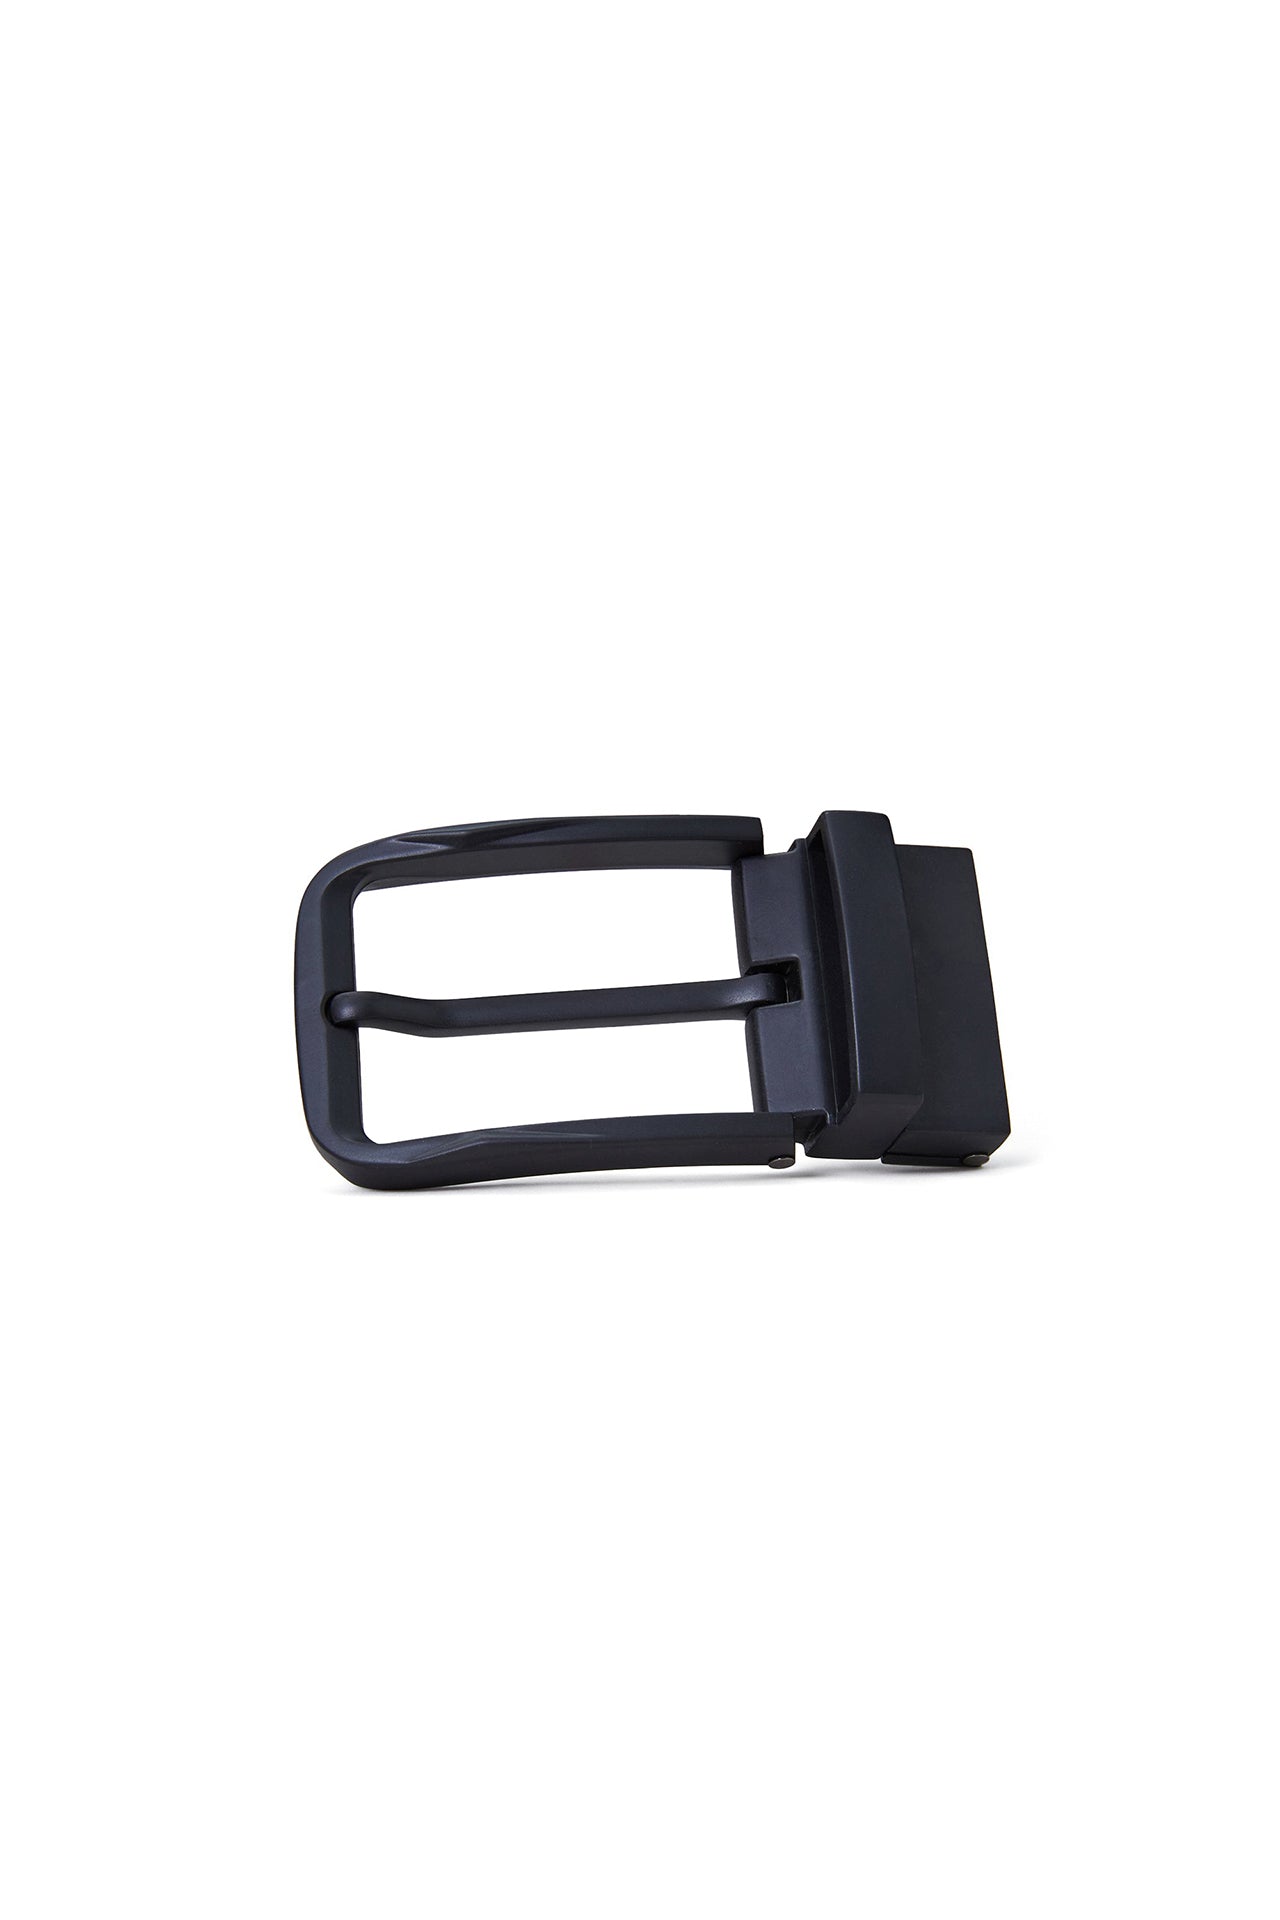 35mm Needle Buckle [Without Strap]